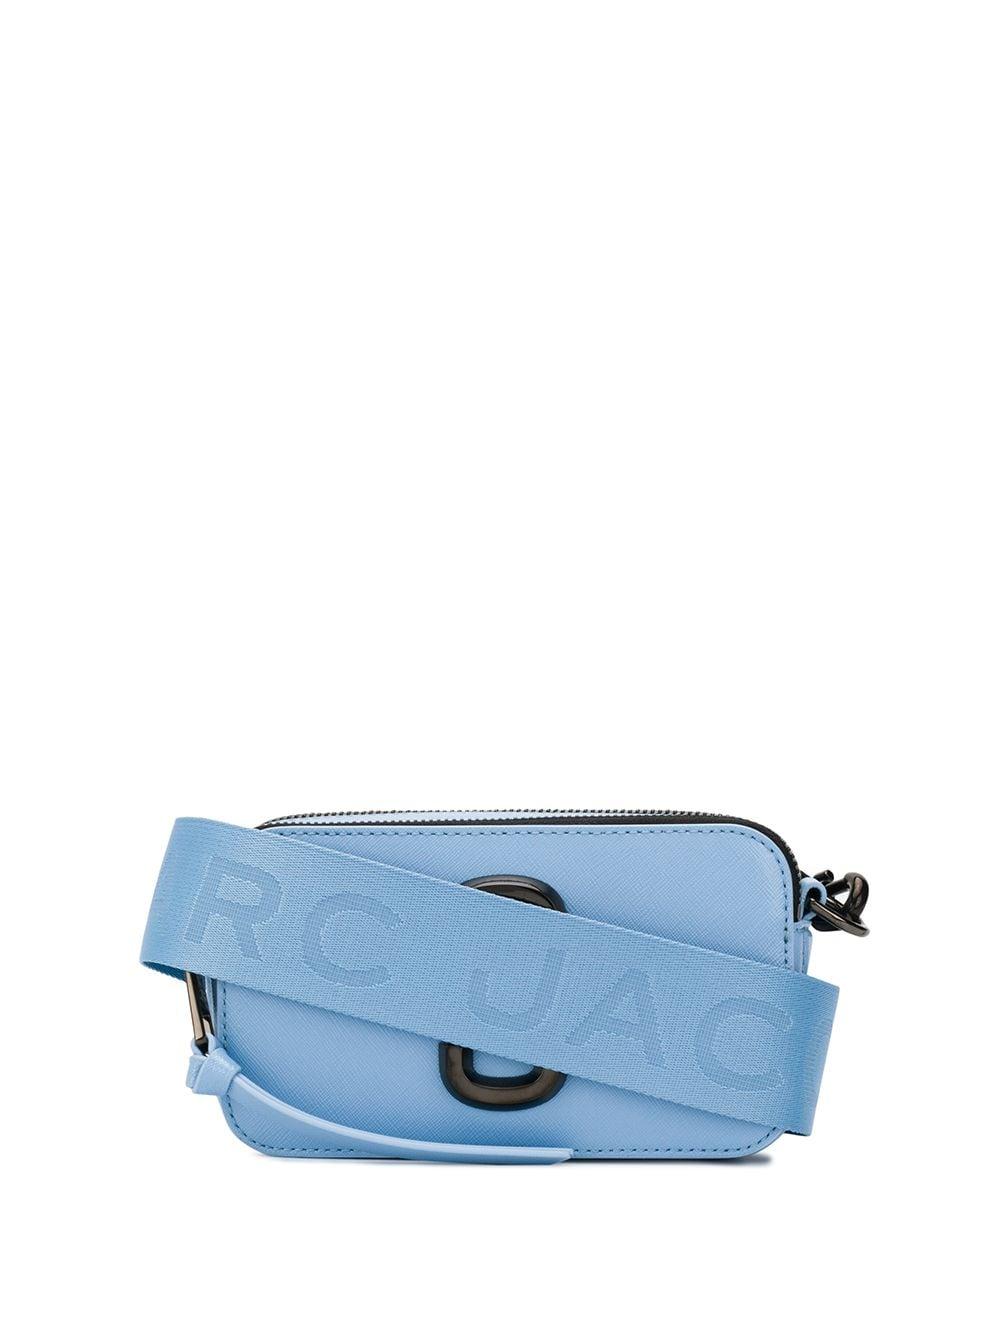 Marc Jacobs The Leather Snapshot Camera Bag in Light Blue (Blue) - Save